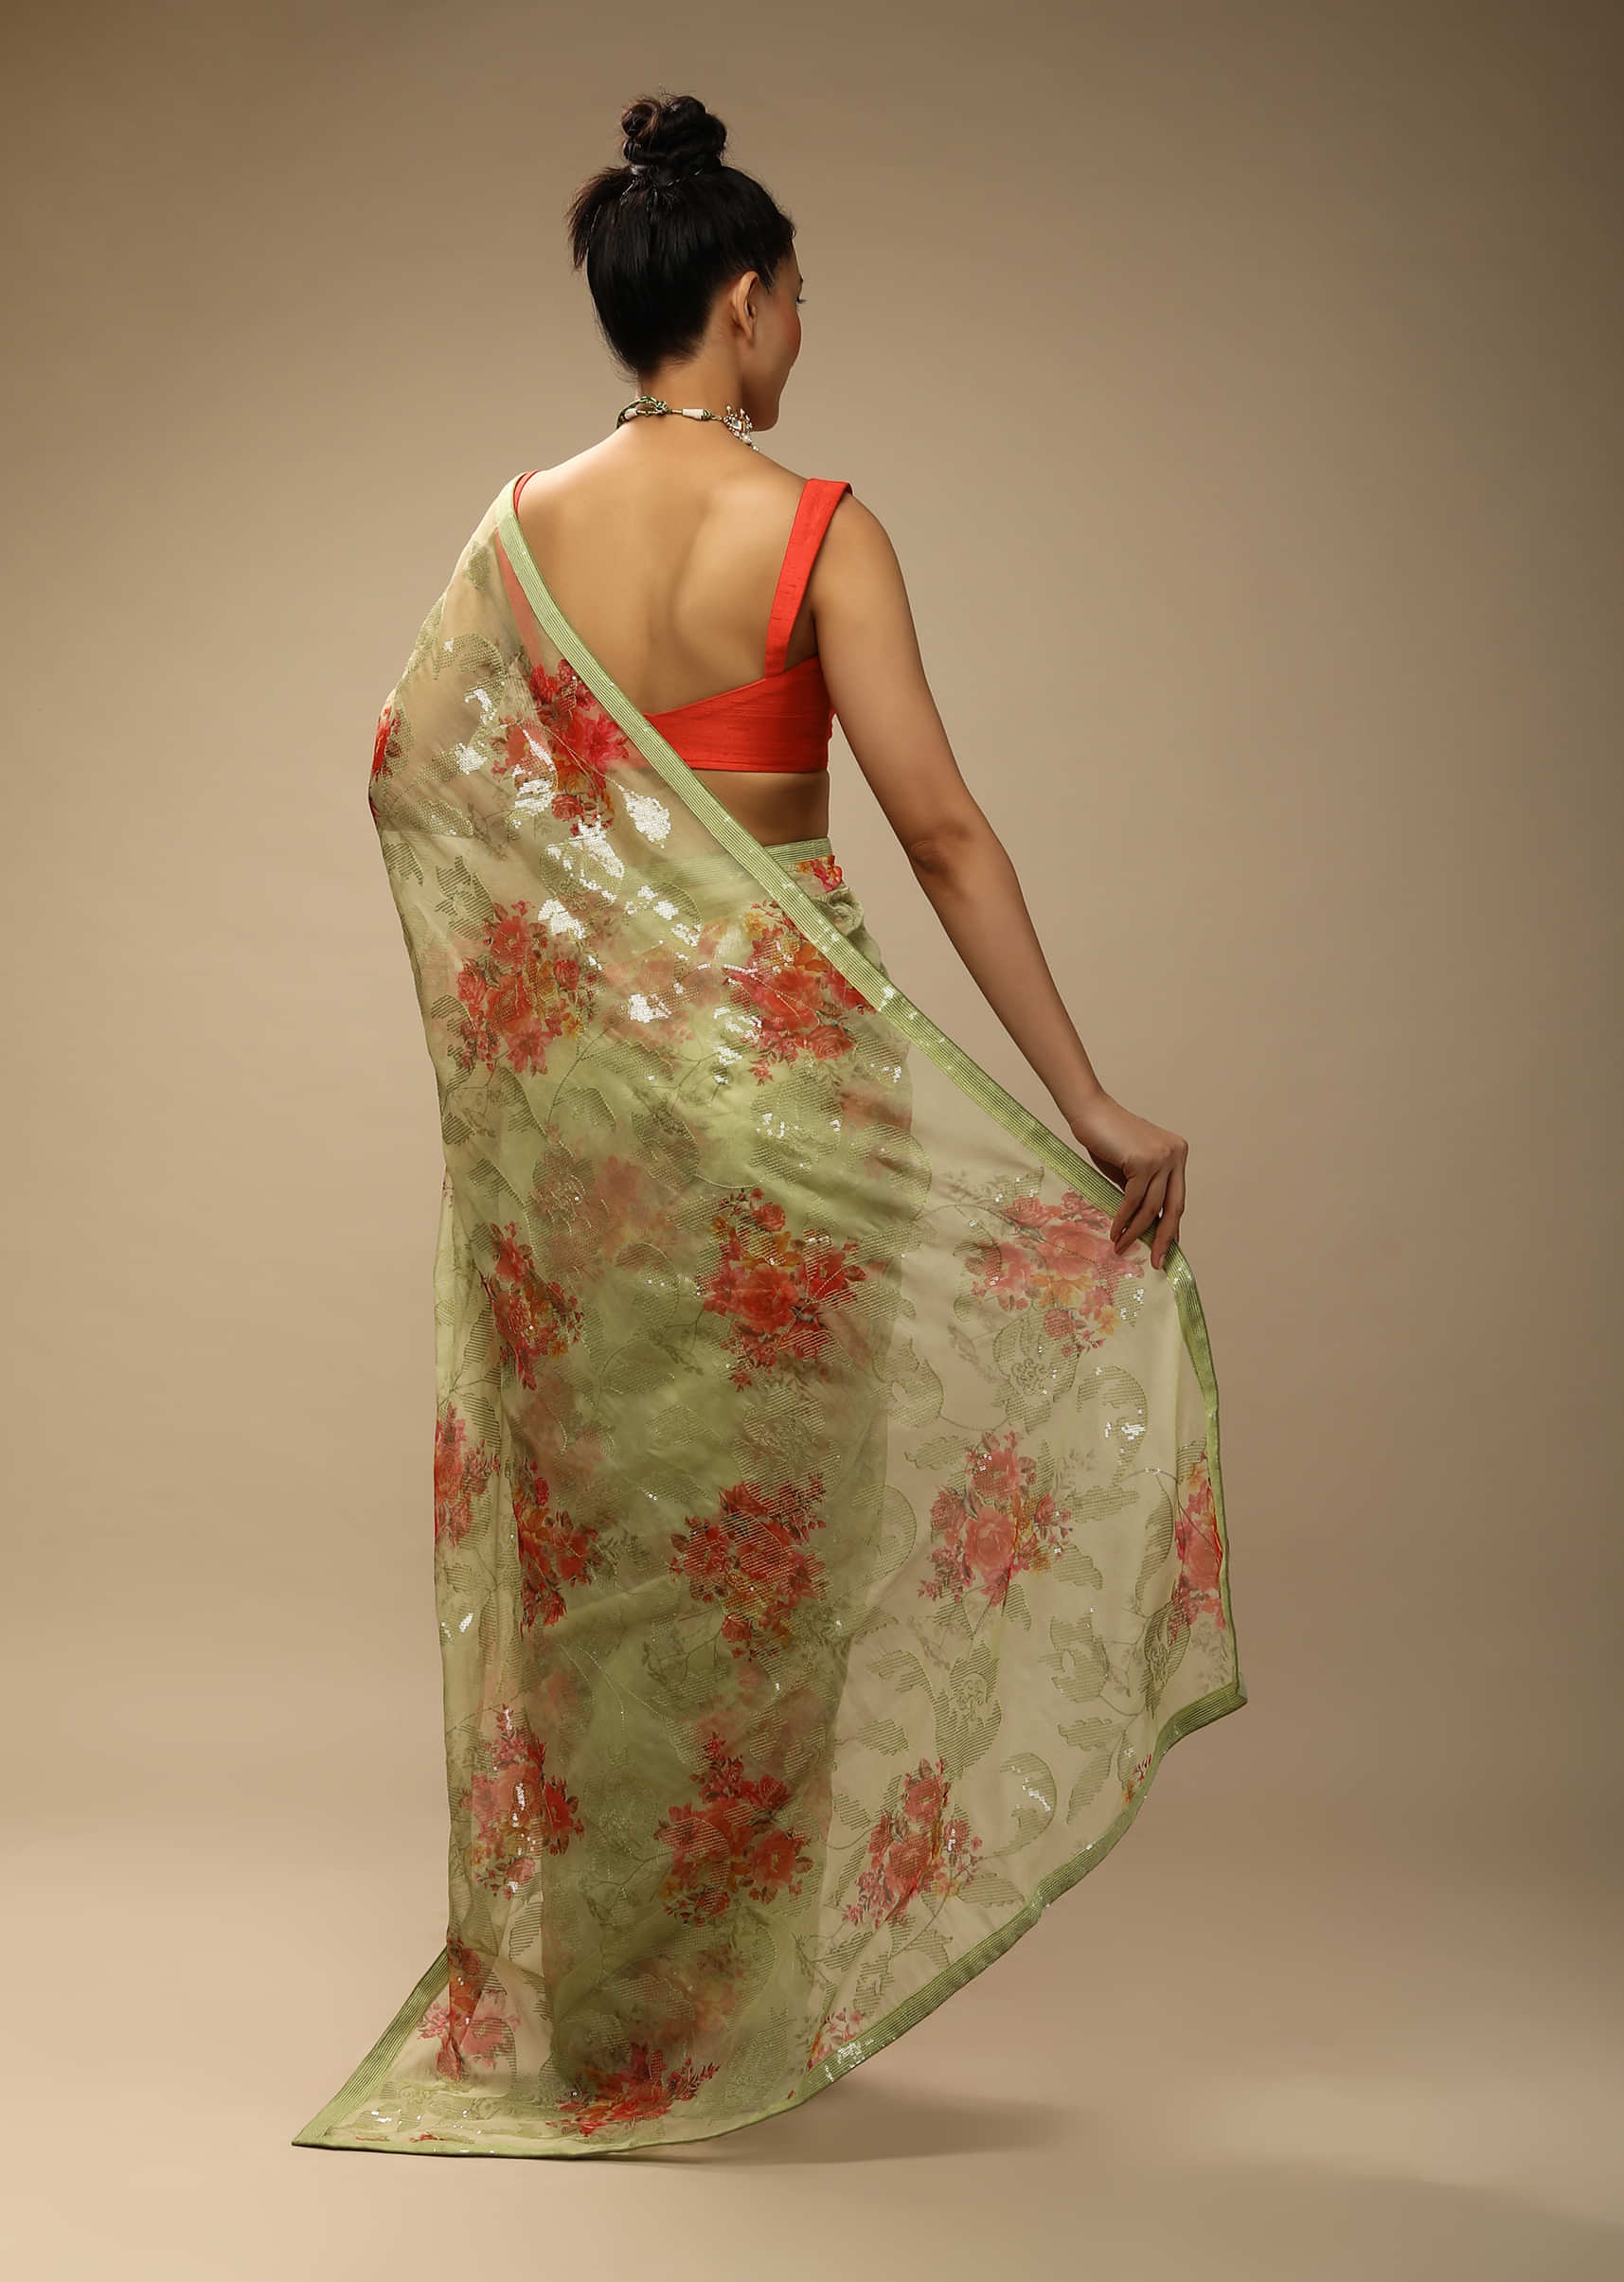 Mellow Green Saree In Organza Silk With Printed Floral Bouquets And Sequins Embroidery